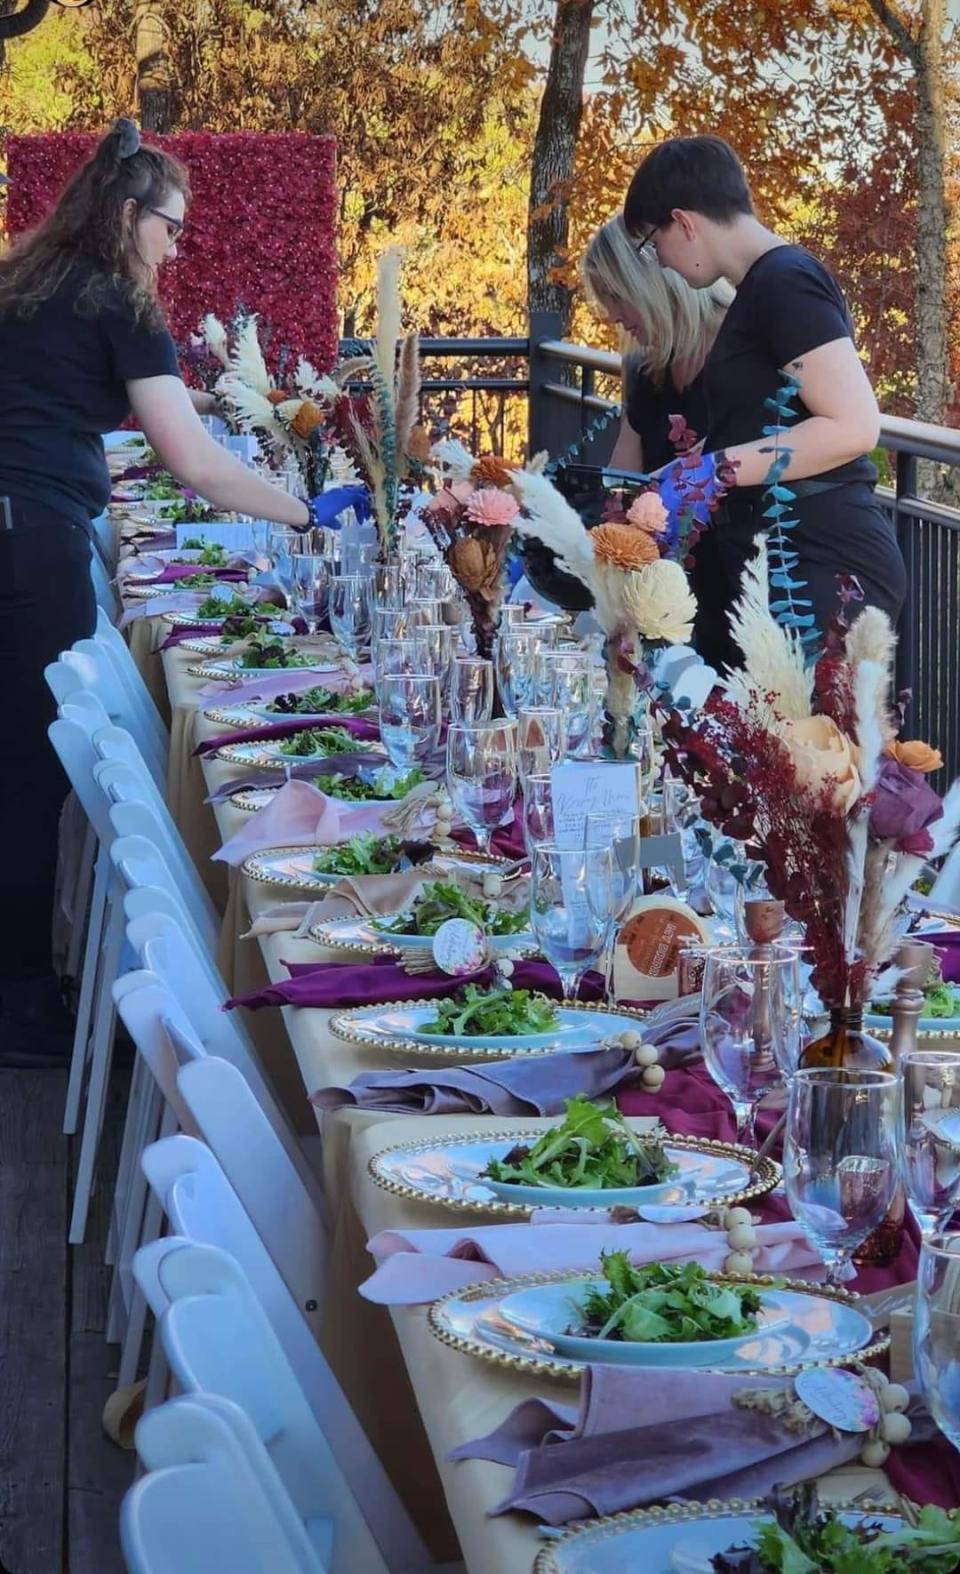 Making a table look good is a big part of the experience.